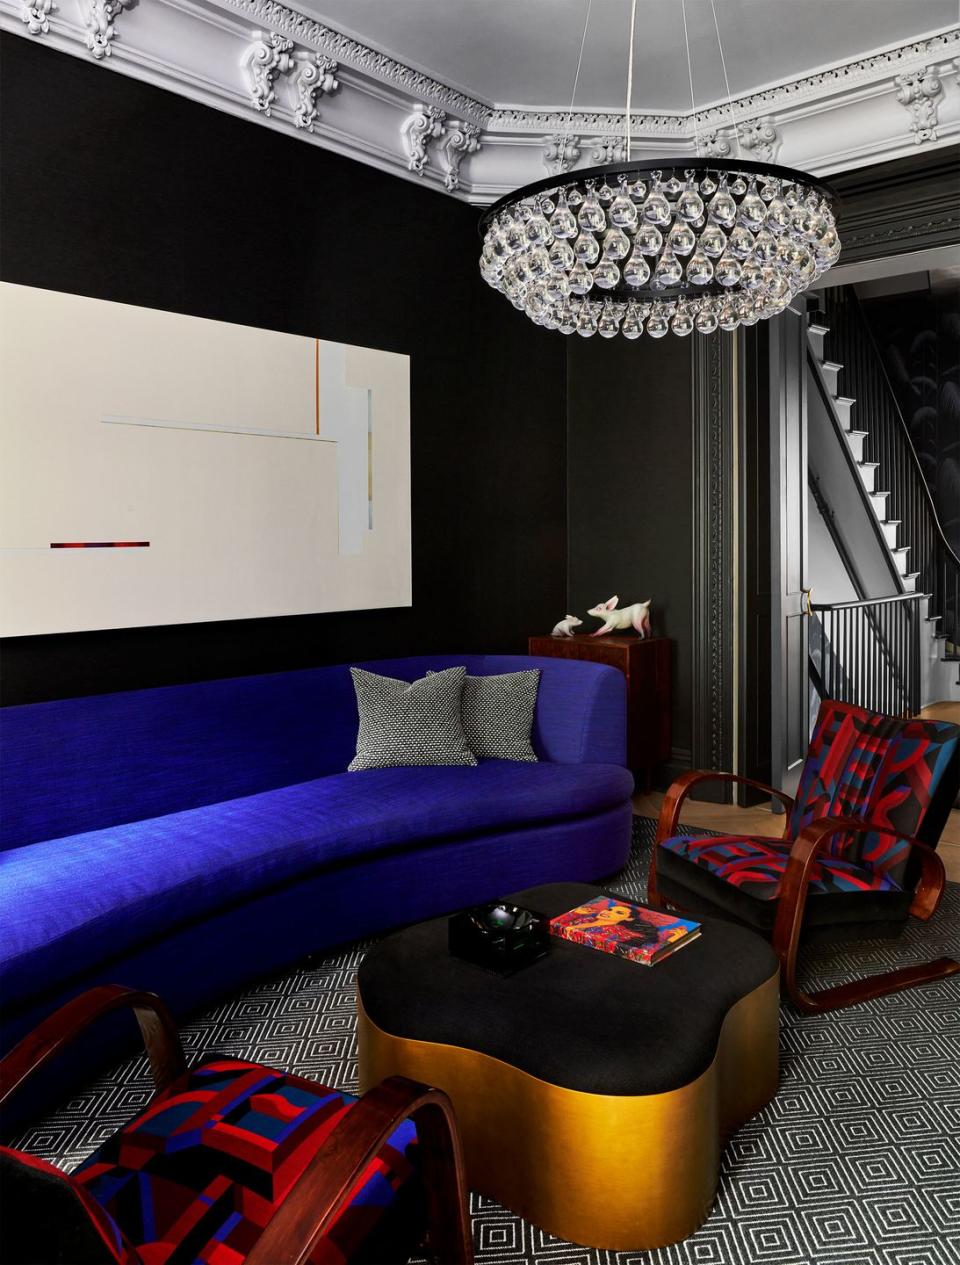 a living room has black walls with white ornate ceiling molding, a chandelier made of crystal teardrops, a cobalt blue sofa, a white artwork on the wall, a curved edge cocktail table, two patterned armchairs